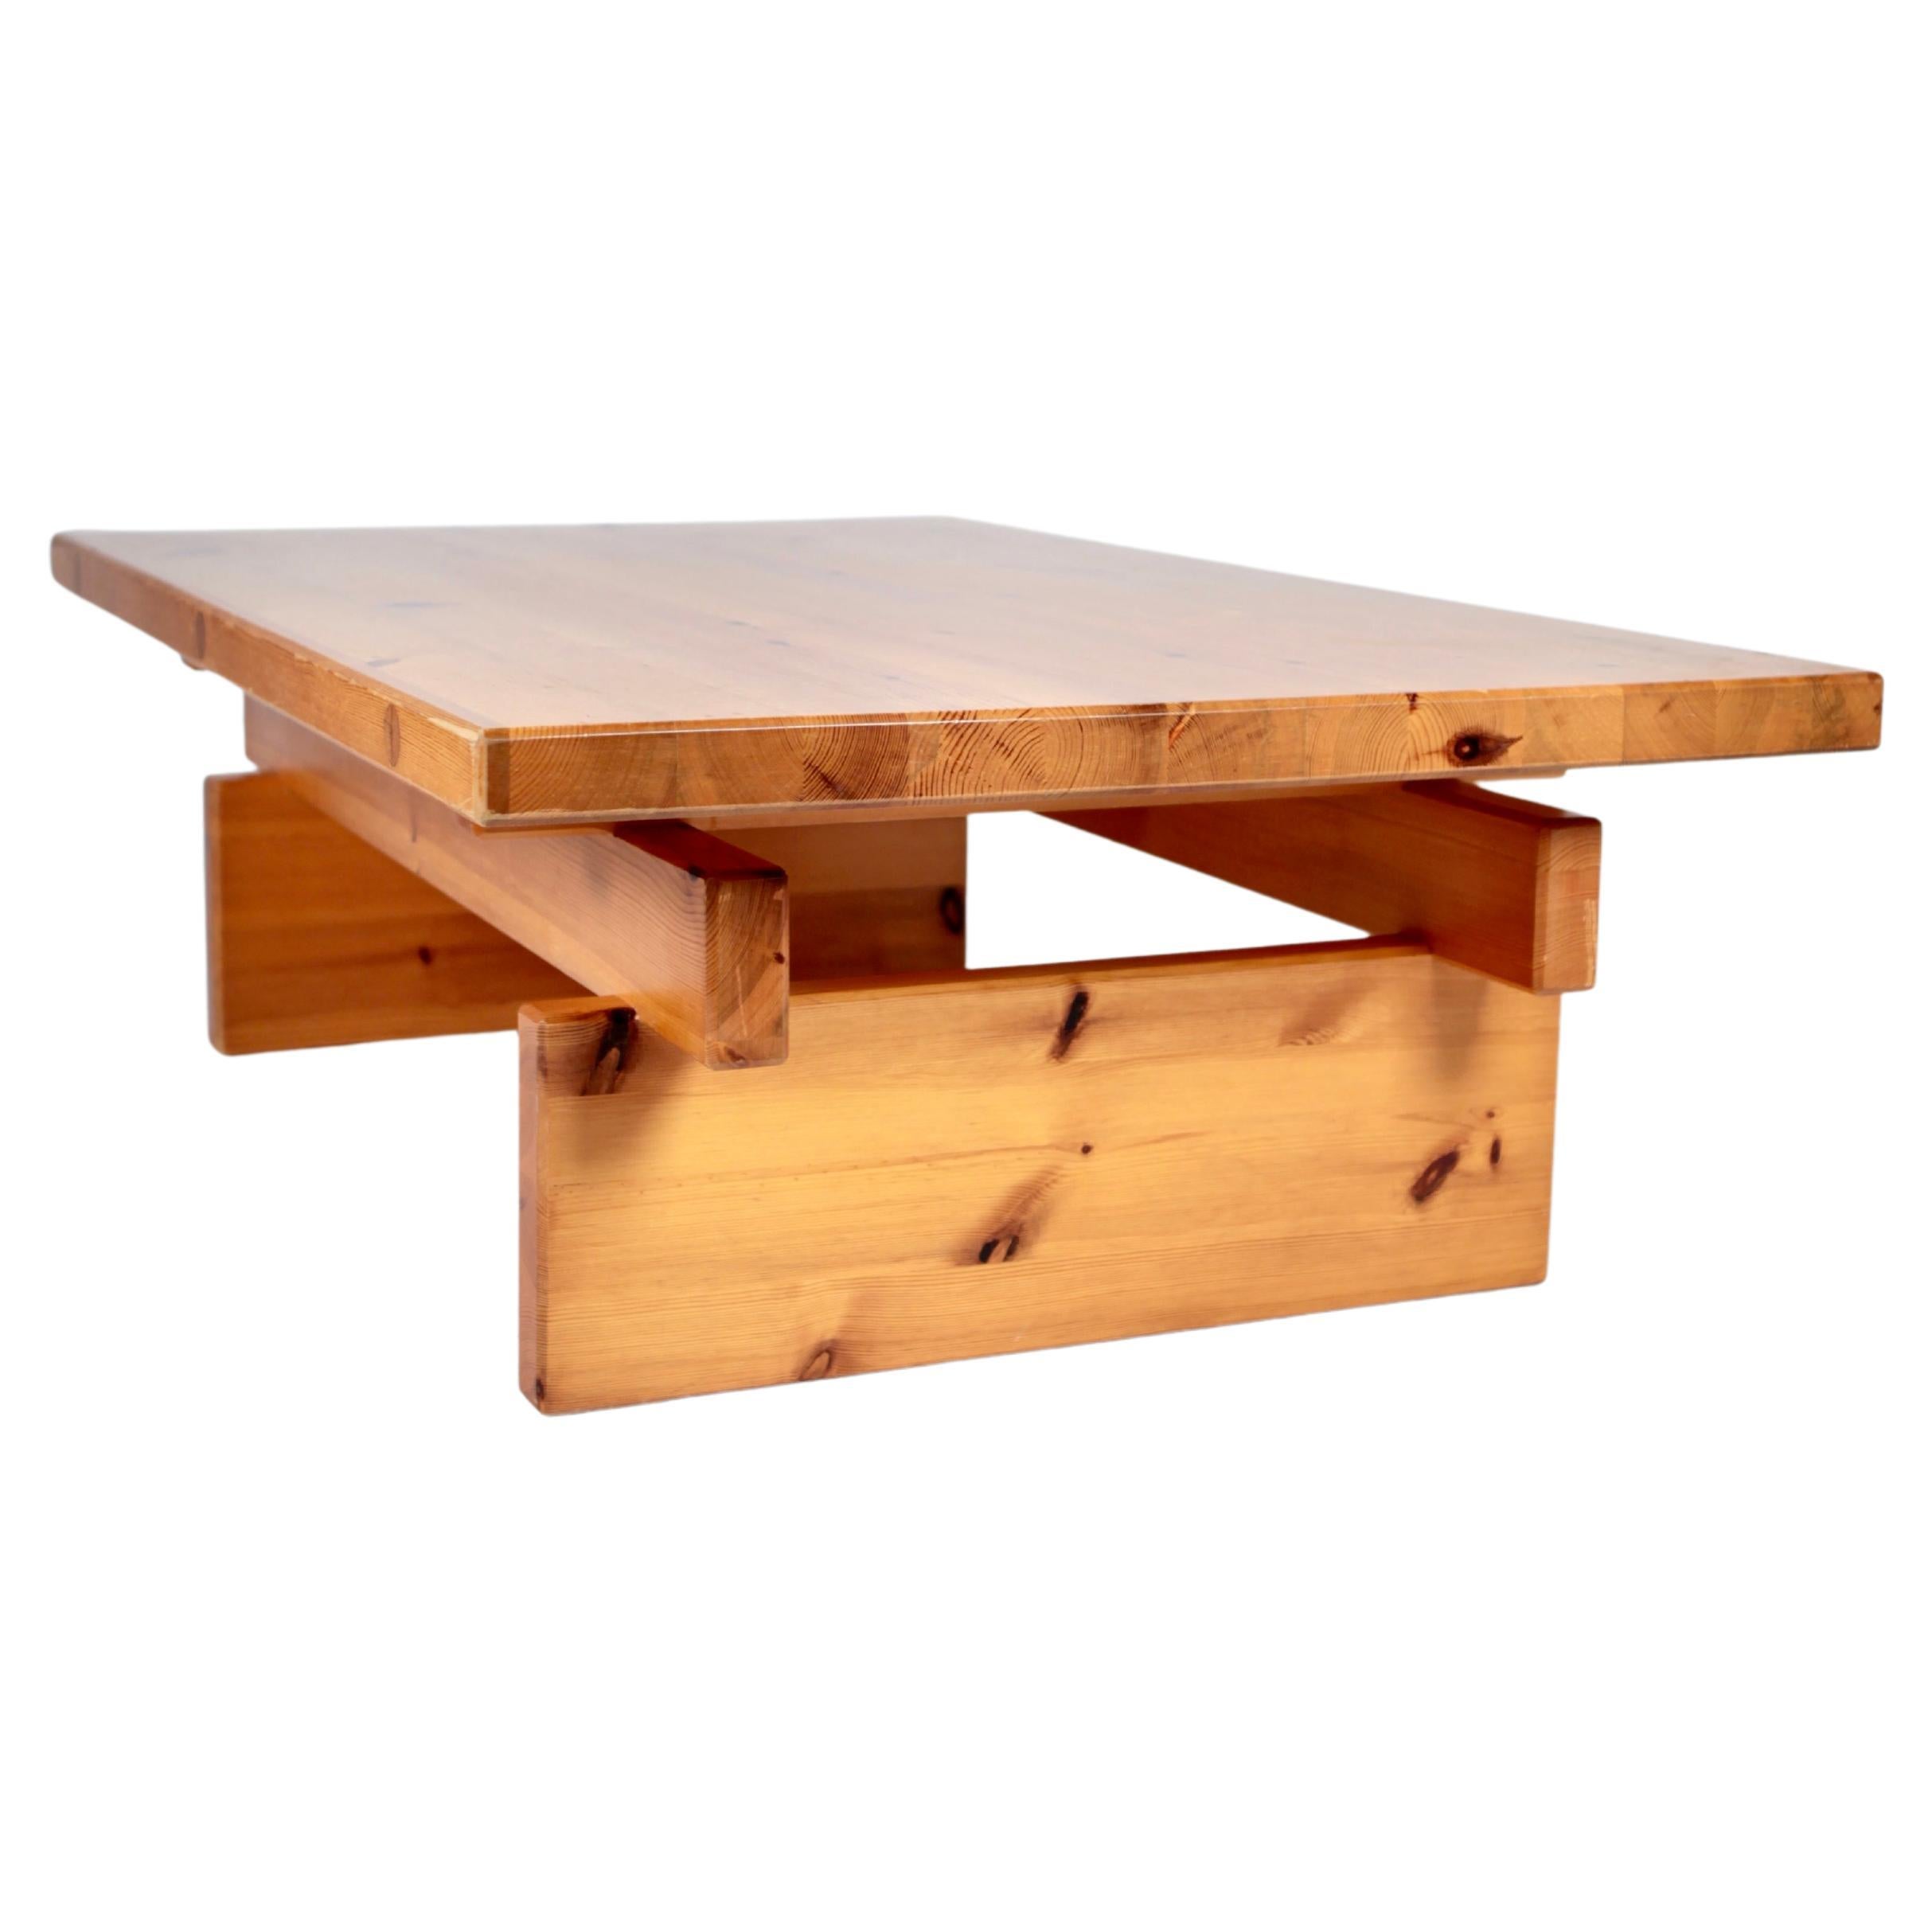 Roland Wilhelmsson, Coffee-Table in Solid Pine, Executed by Timmermannen, 1973 For Sale